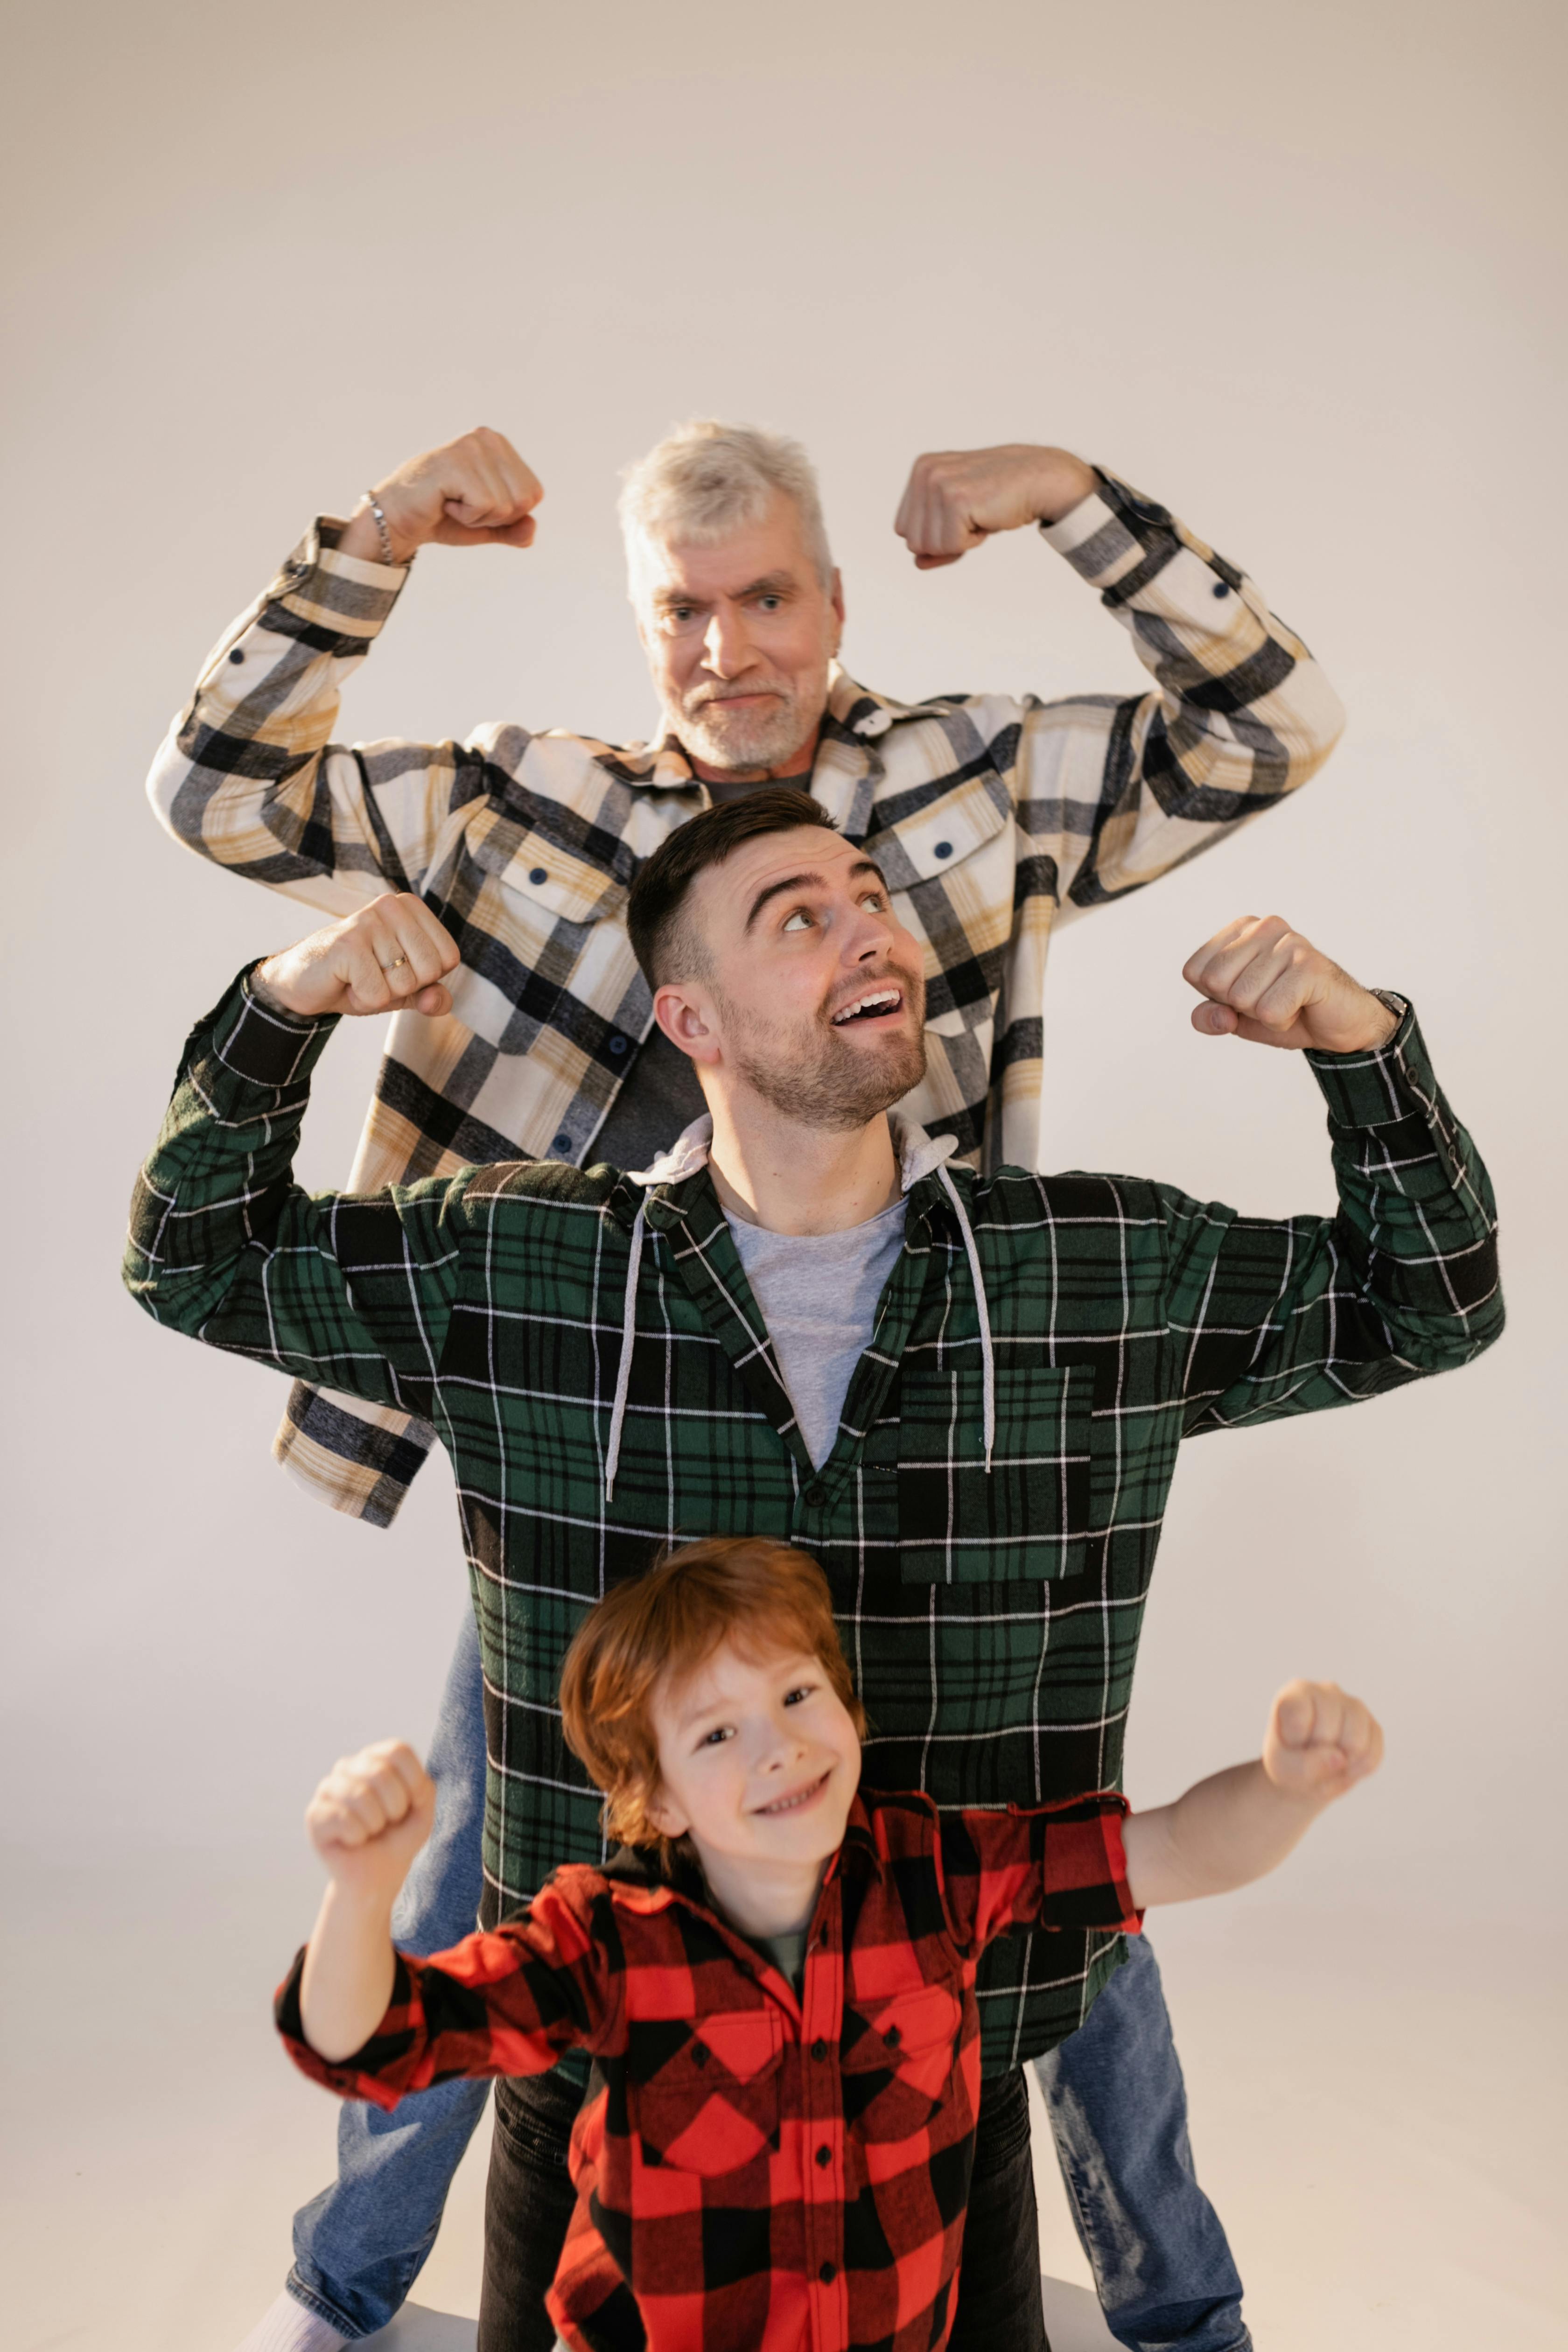 A family showing off their muscles | Source: Pexels